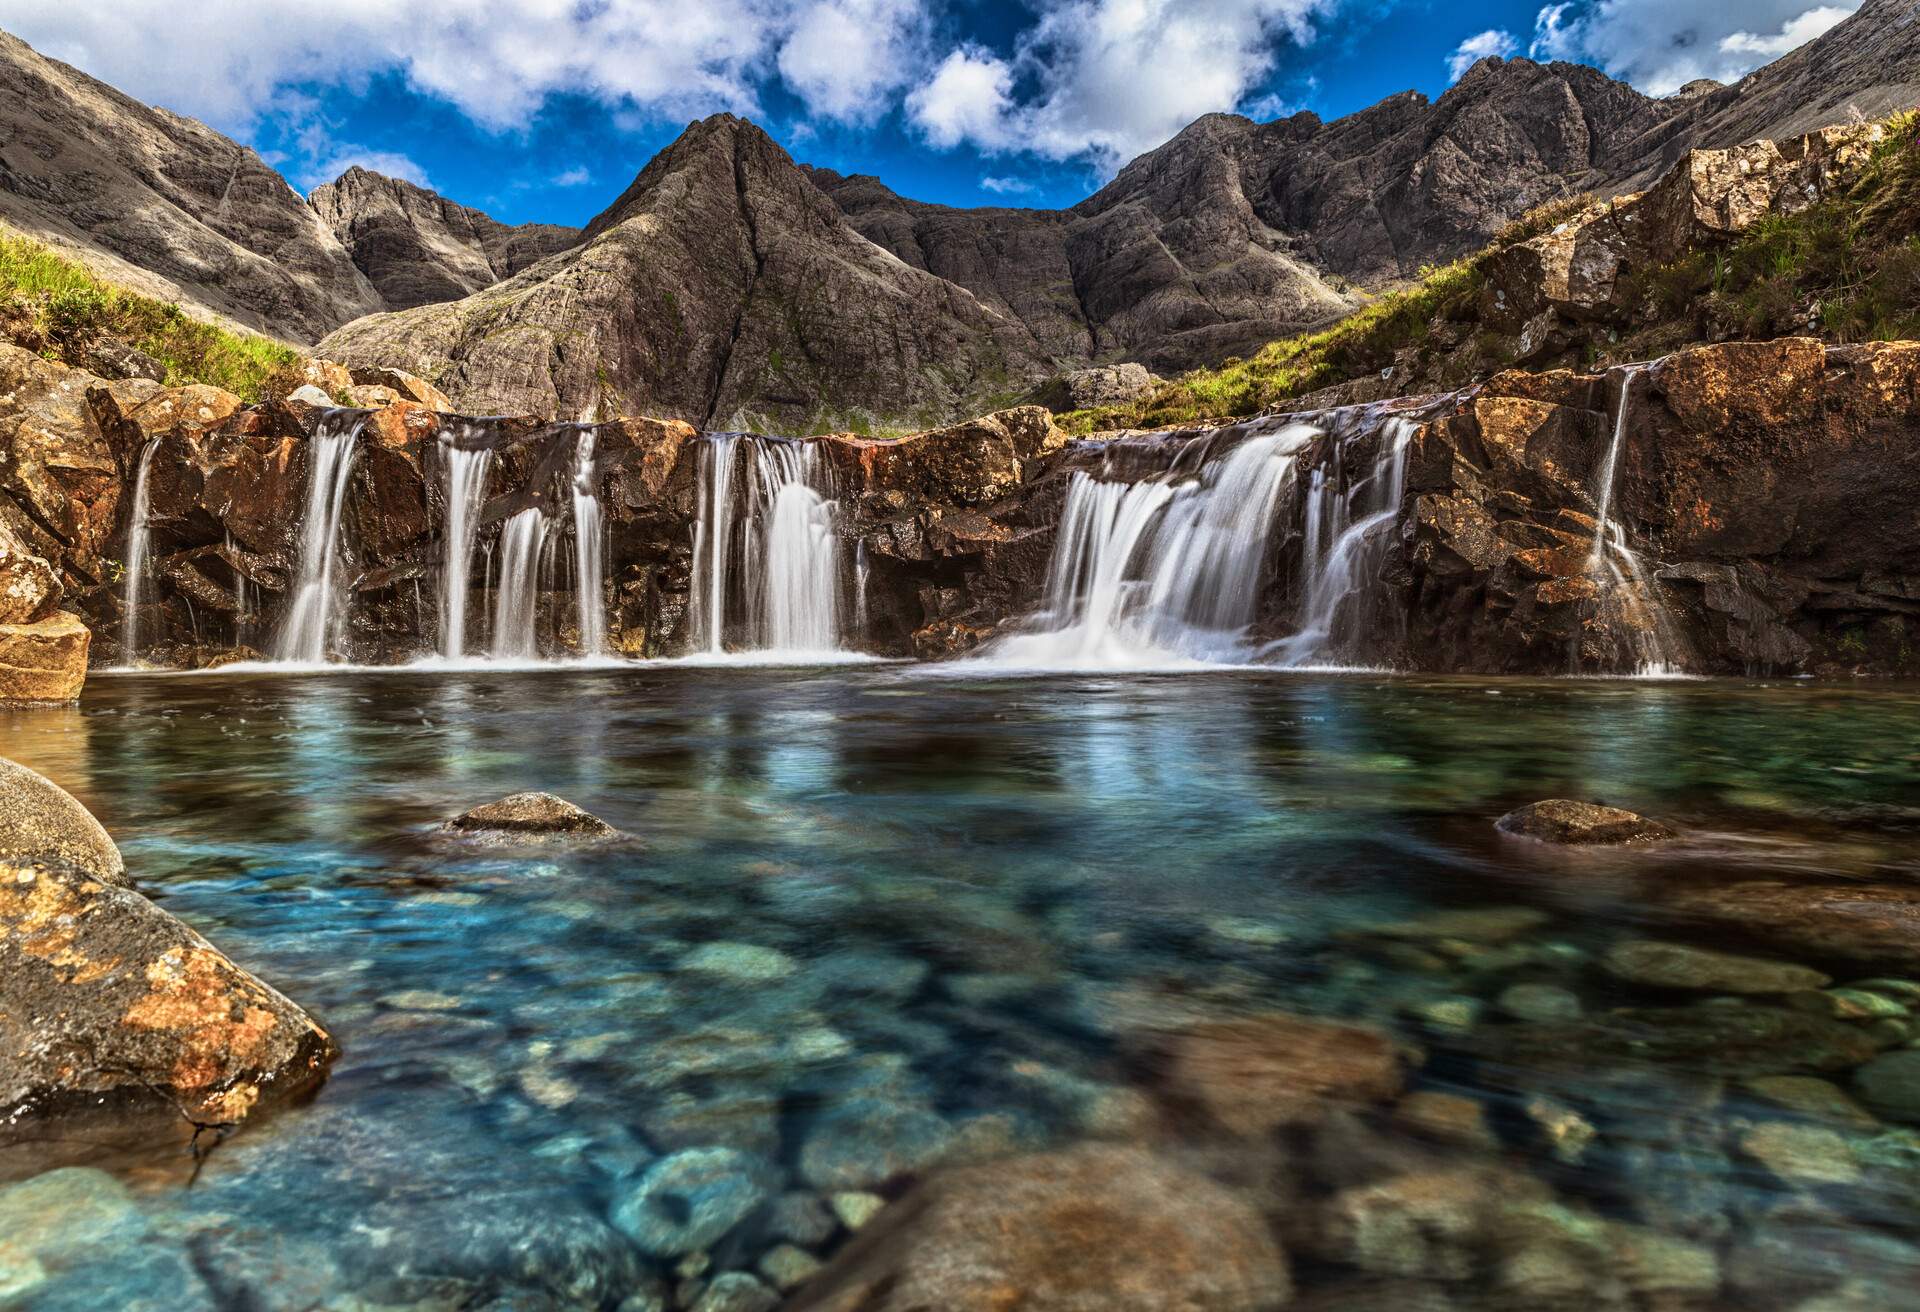 DEST_SCOTLAND_ISLE-OF-SKYE_FAIRY-POOLS_GettyImages-531564245